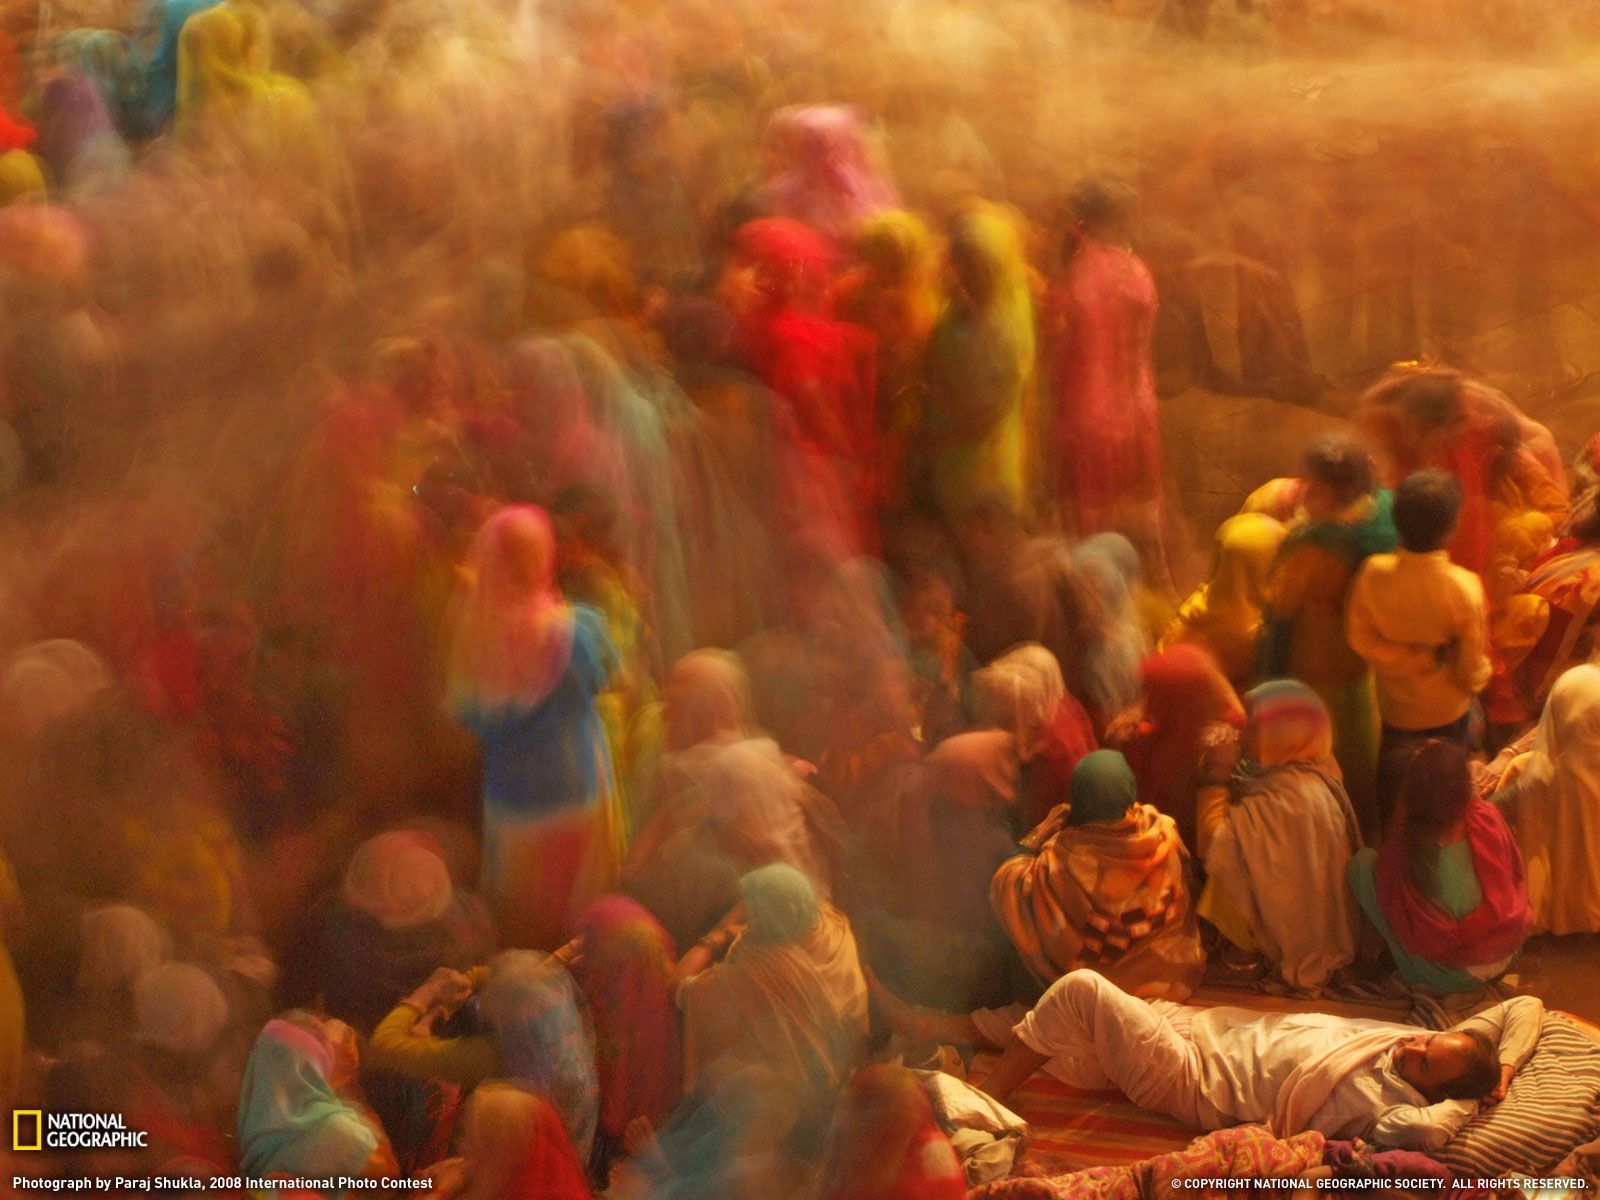 Commotion Picture, India Wallpaper - National Geographic Photo of ...